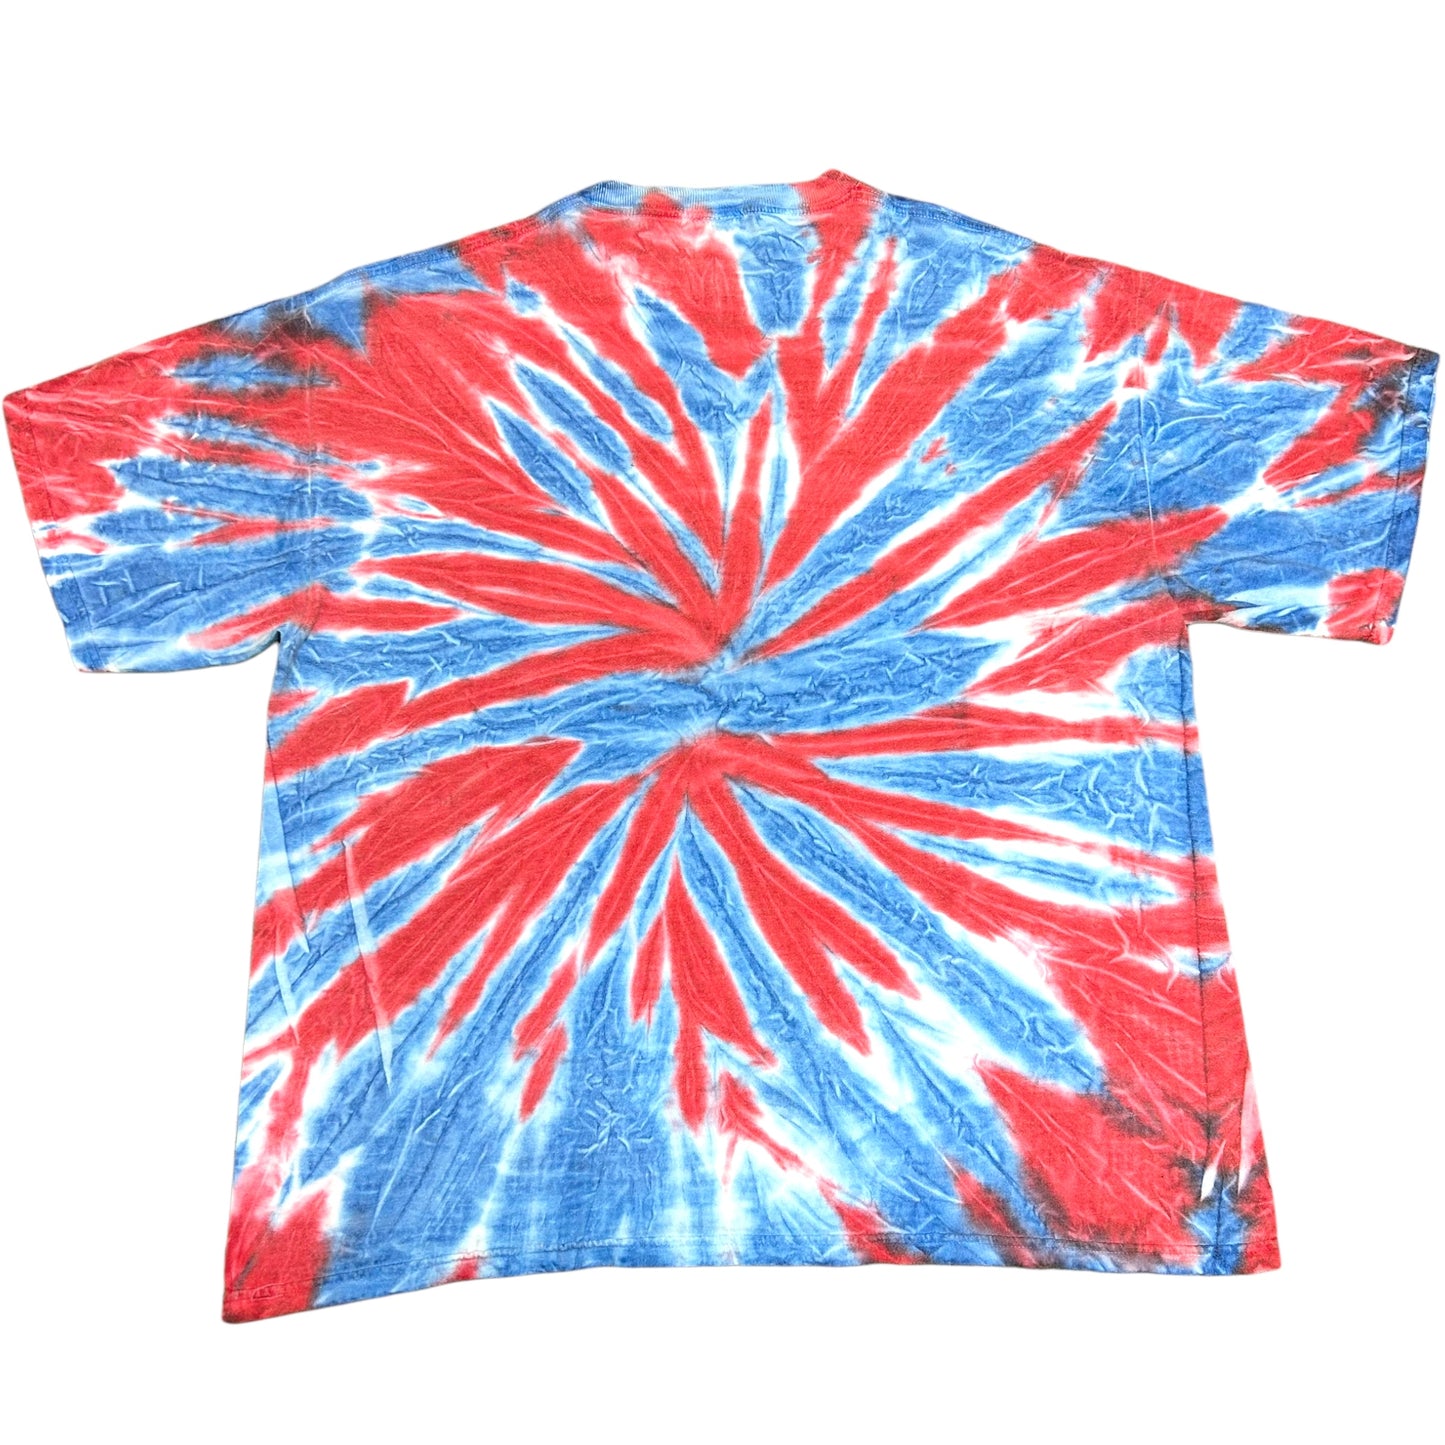 Vintage 1990s New England Patriots “Go Pats” Red/Blue Tie-Dye Graphic T-Shirt - Size XXL (Fits Boxy XL)